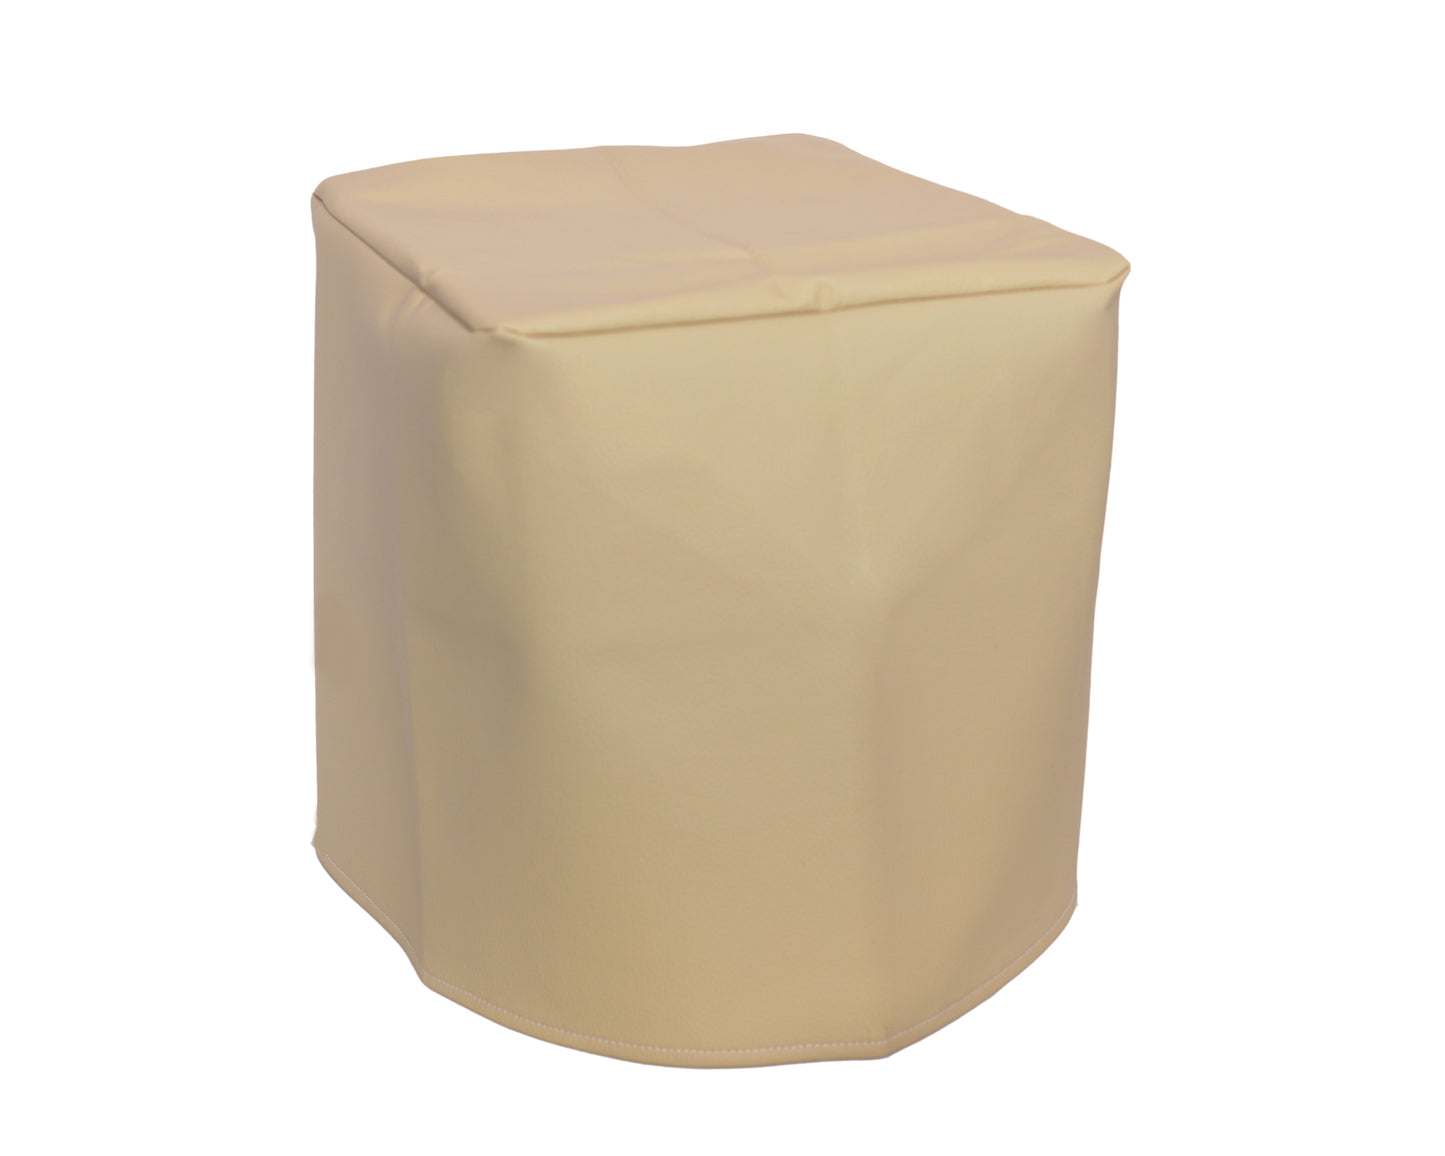 Perfect Dust Cover, Beige Padded Cover Compatible with Ninja Foodi